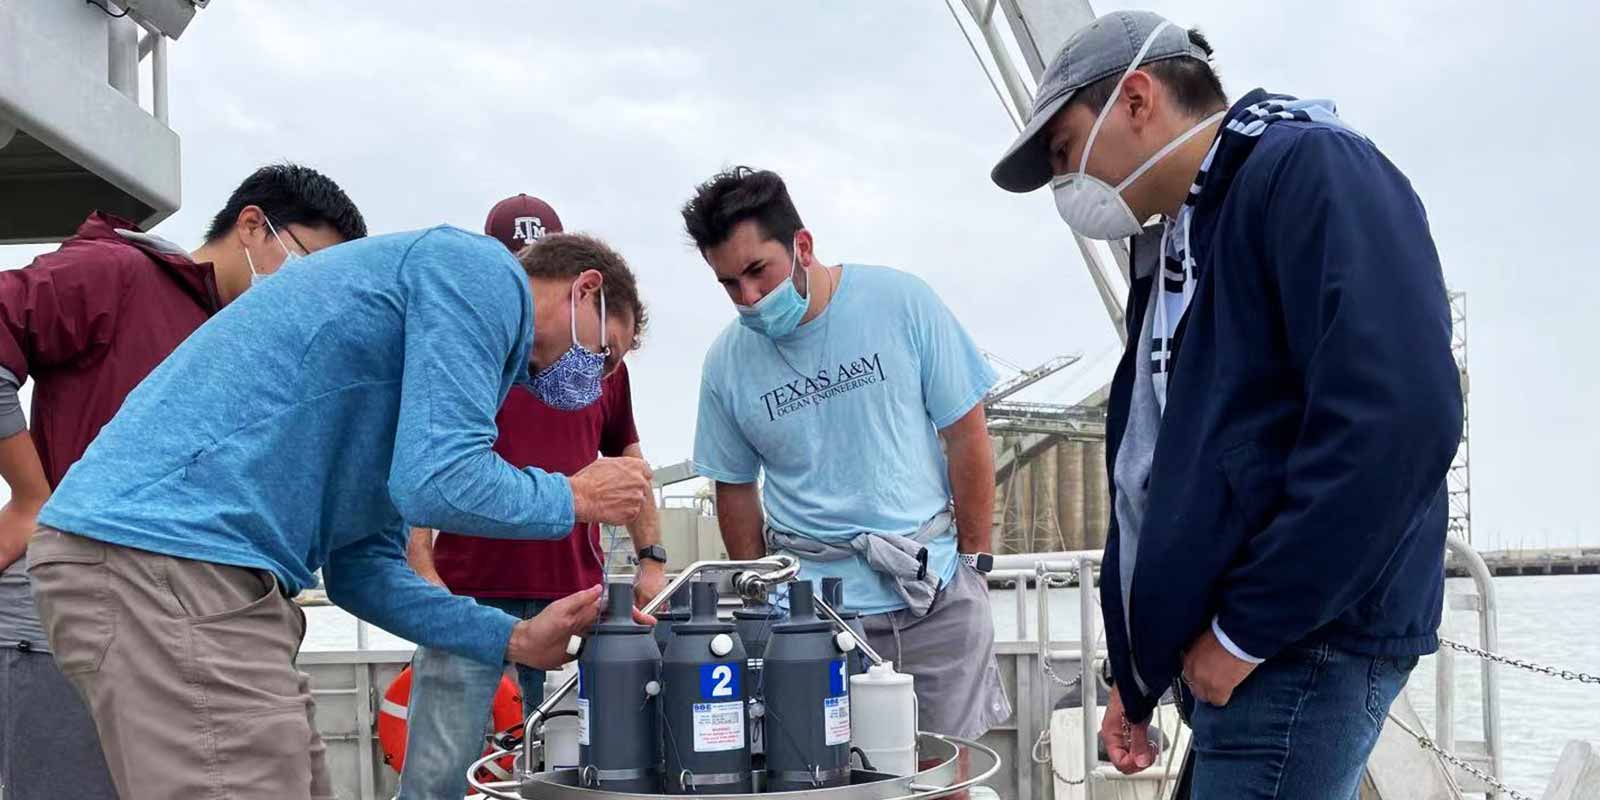 Students on Galveston campus performing a field experiment on a boat.